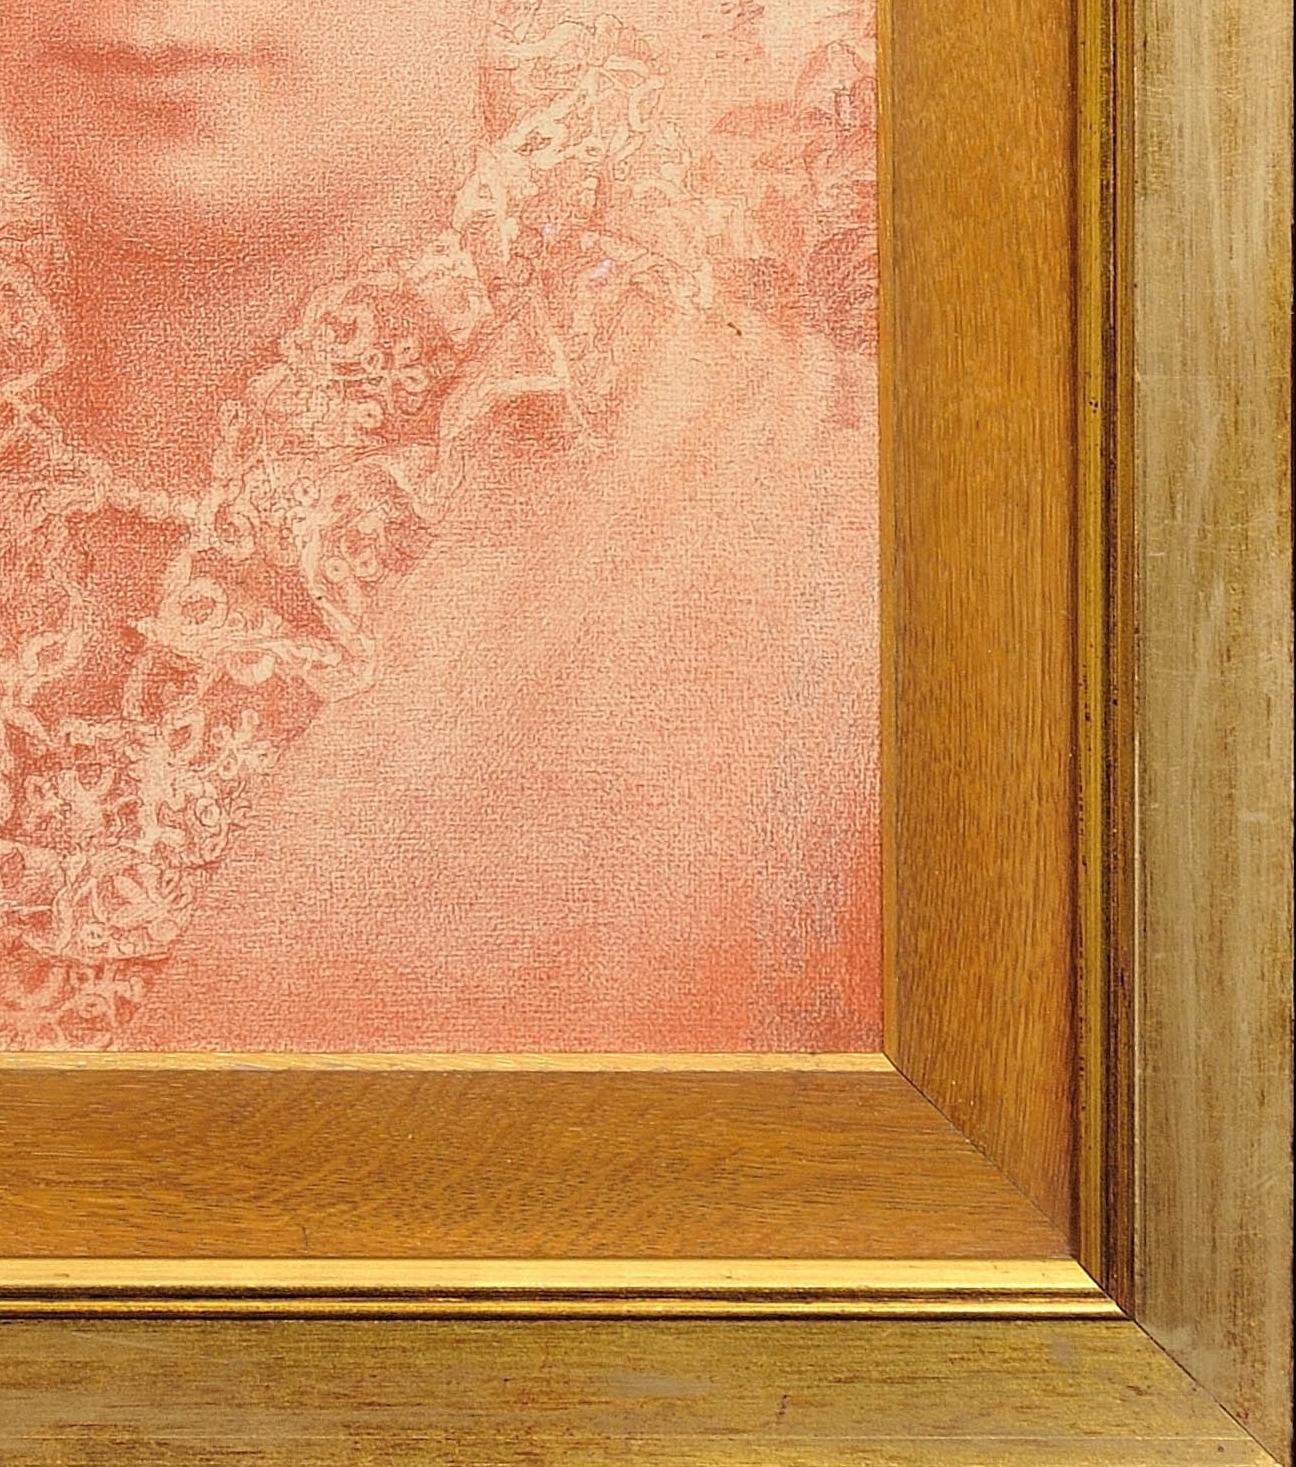 Aesthetic Phase Pre-Raphaelite Movement Late 19th Century. Sanguine Red Chalk For Sale 17